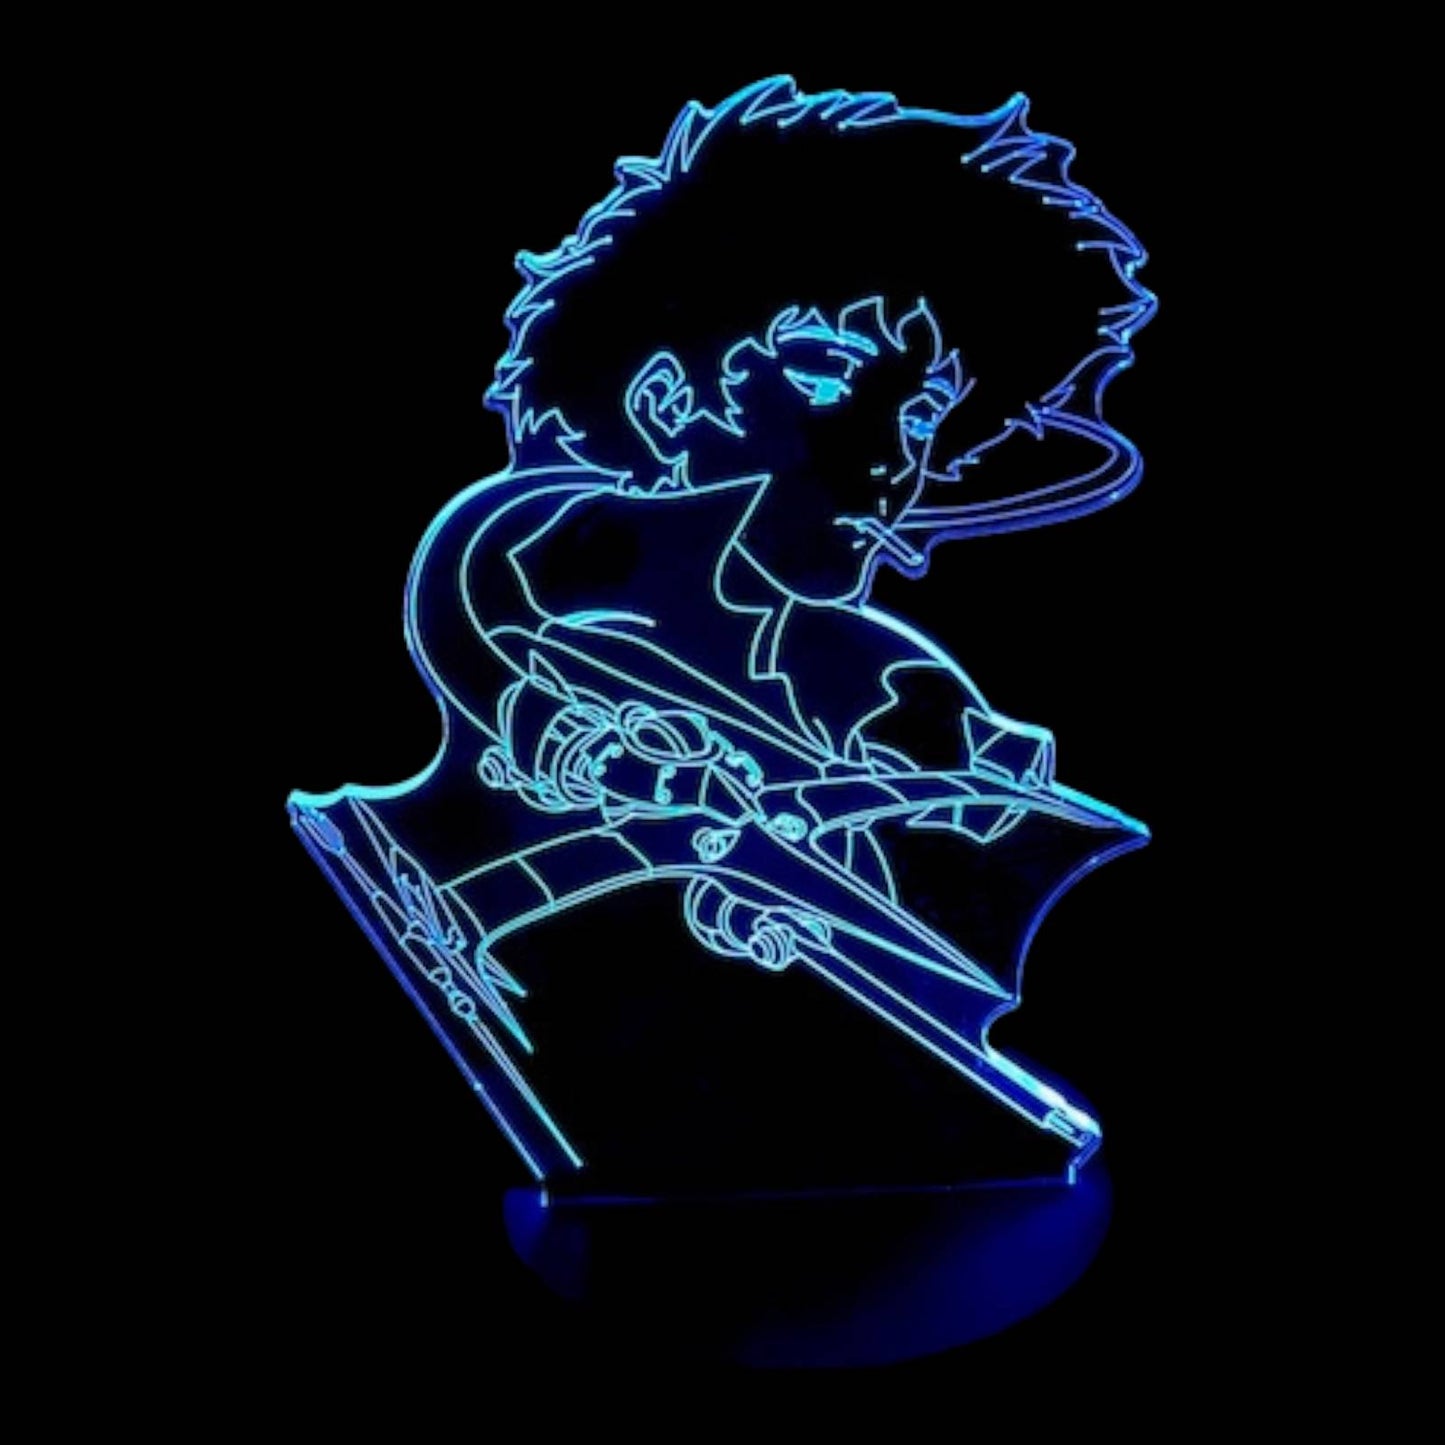 Cowboy Bebop 3D LED Night-Light 7 Color Changing Lamp w/ Touch Switch